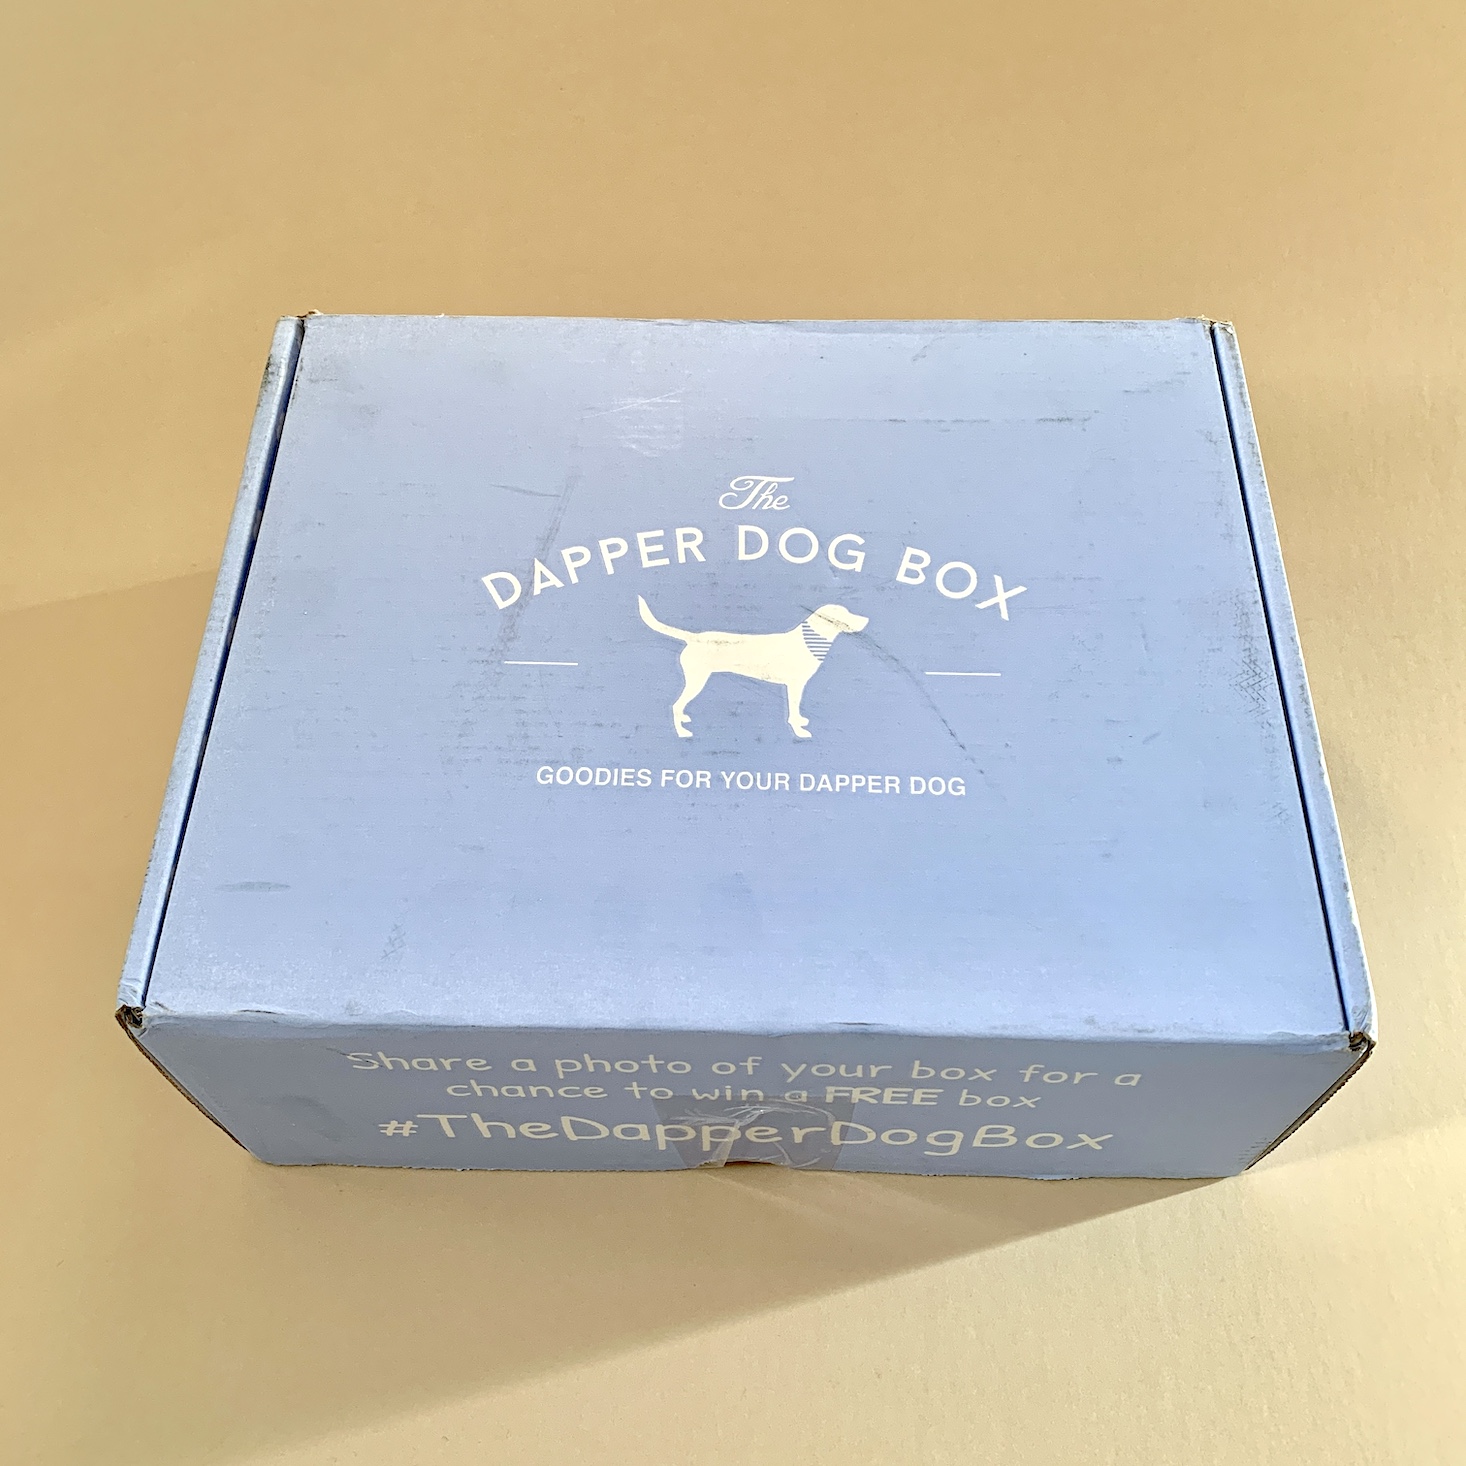 The Dapper Dog Box Review – March 2021